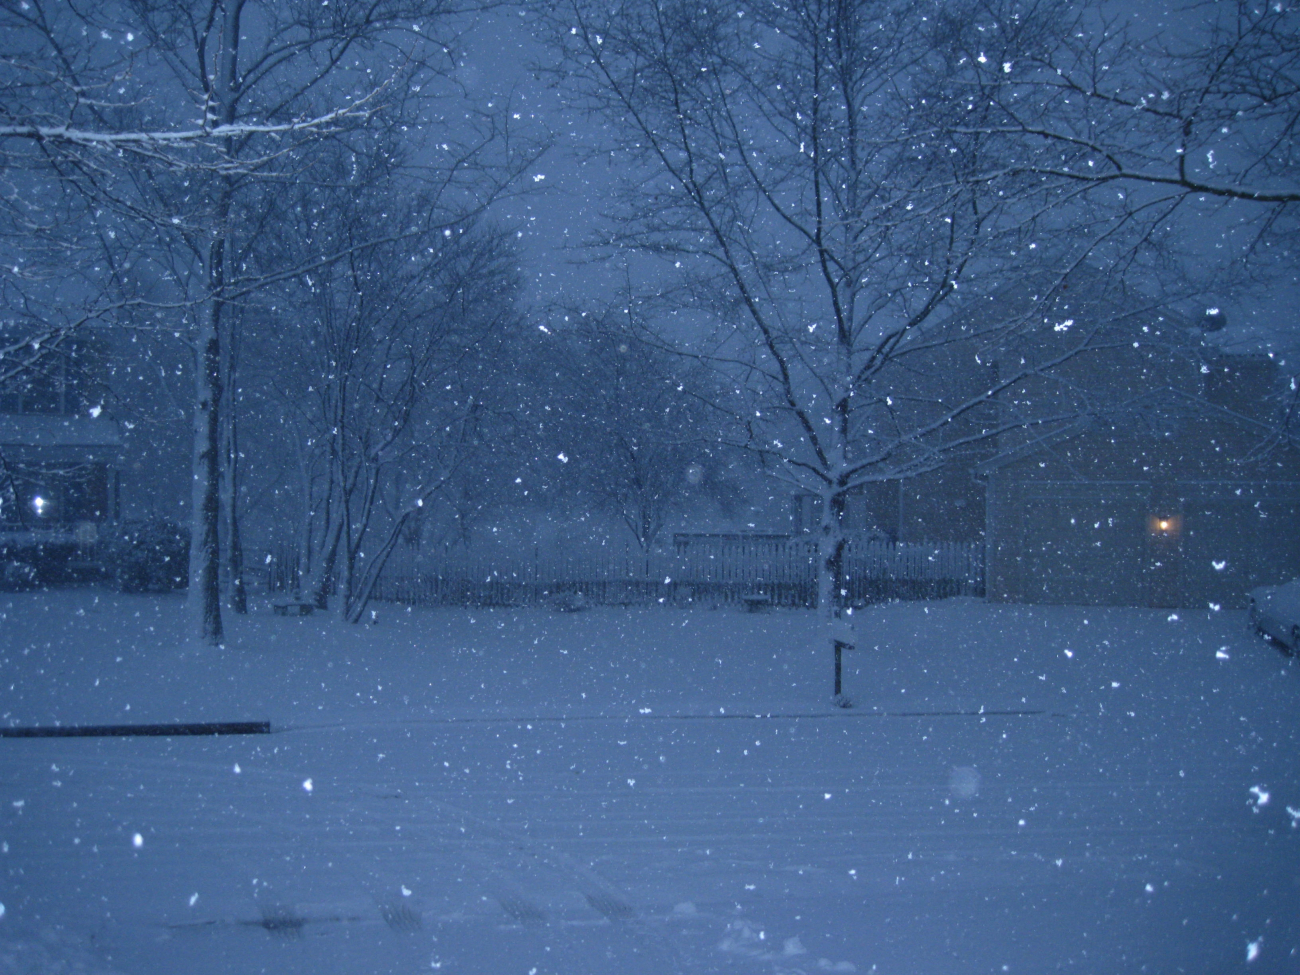 Snow falling on a winter evening